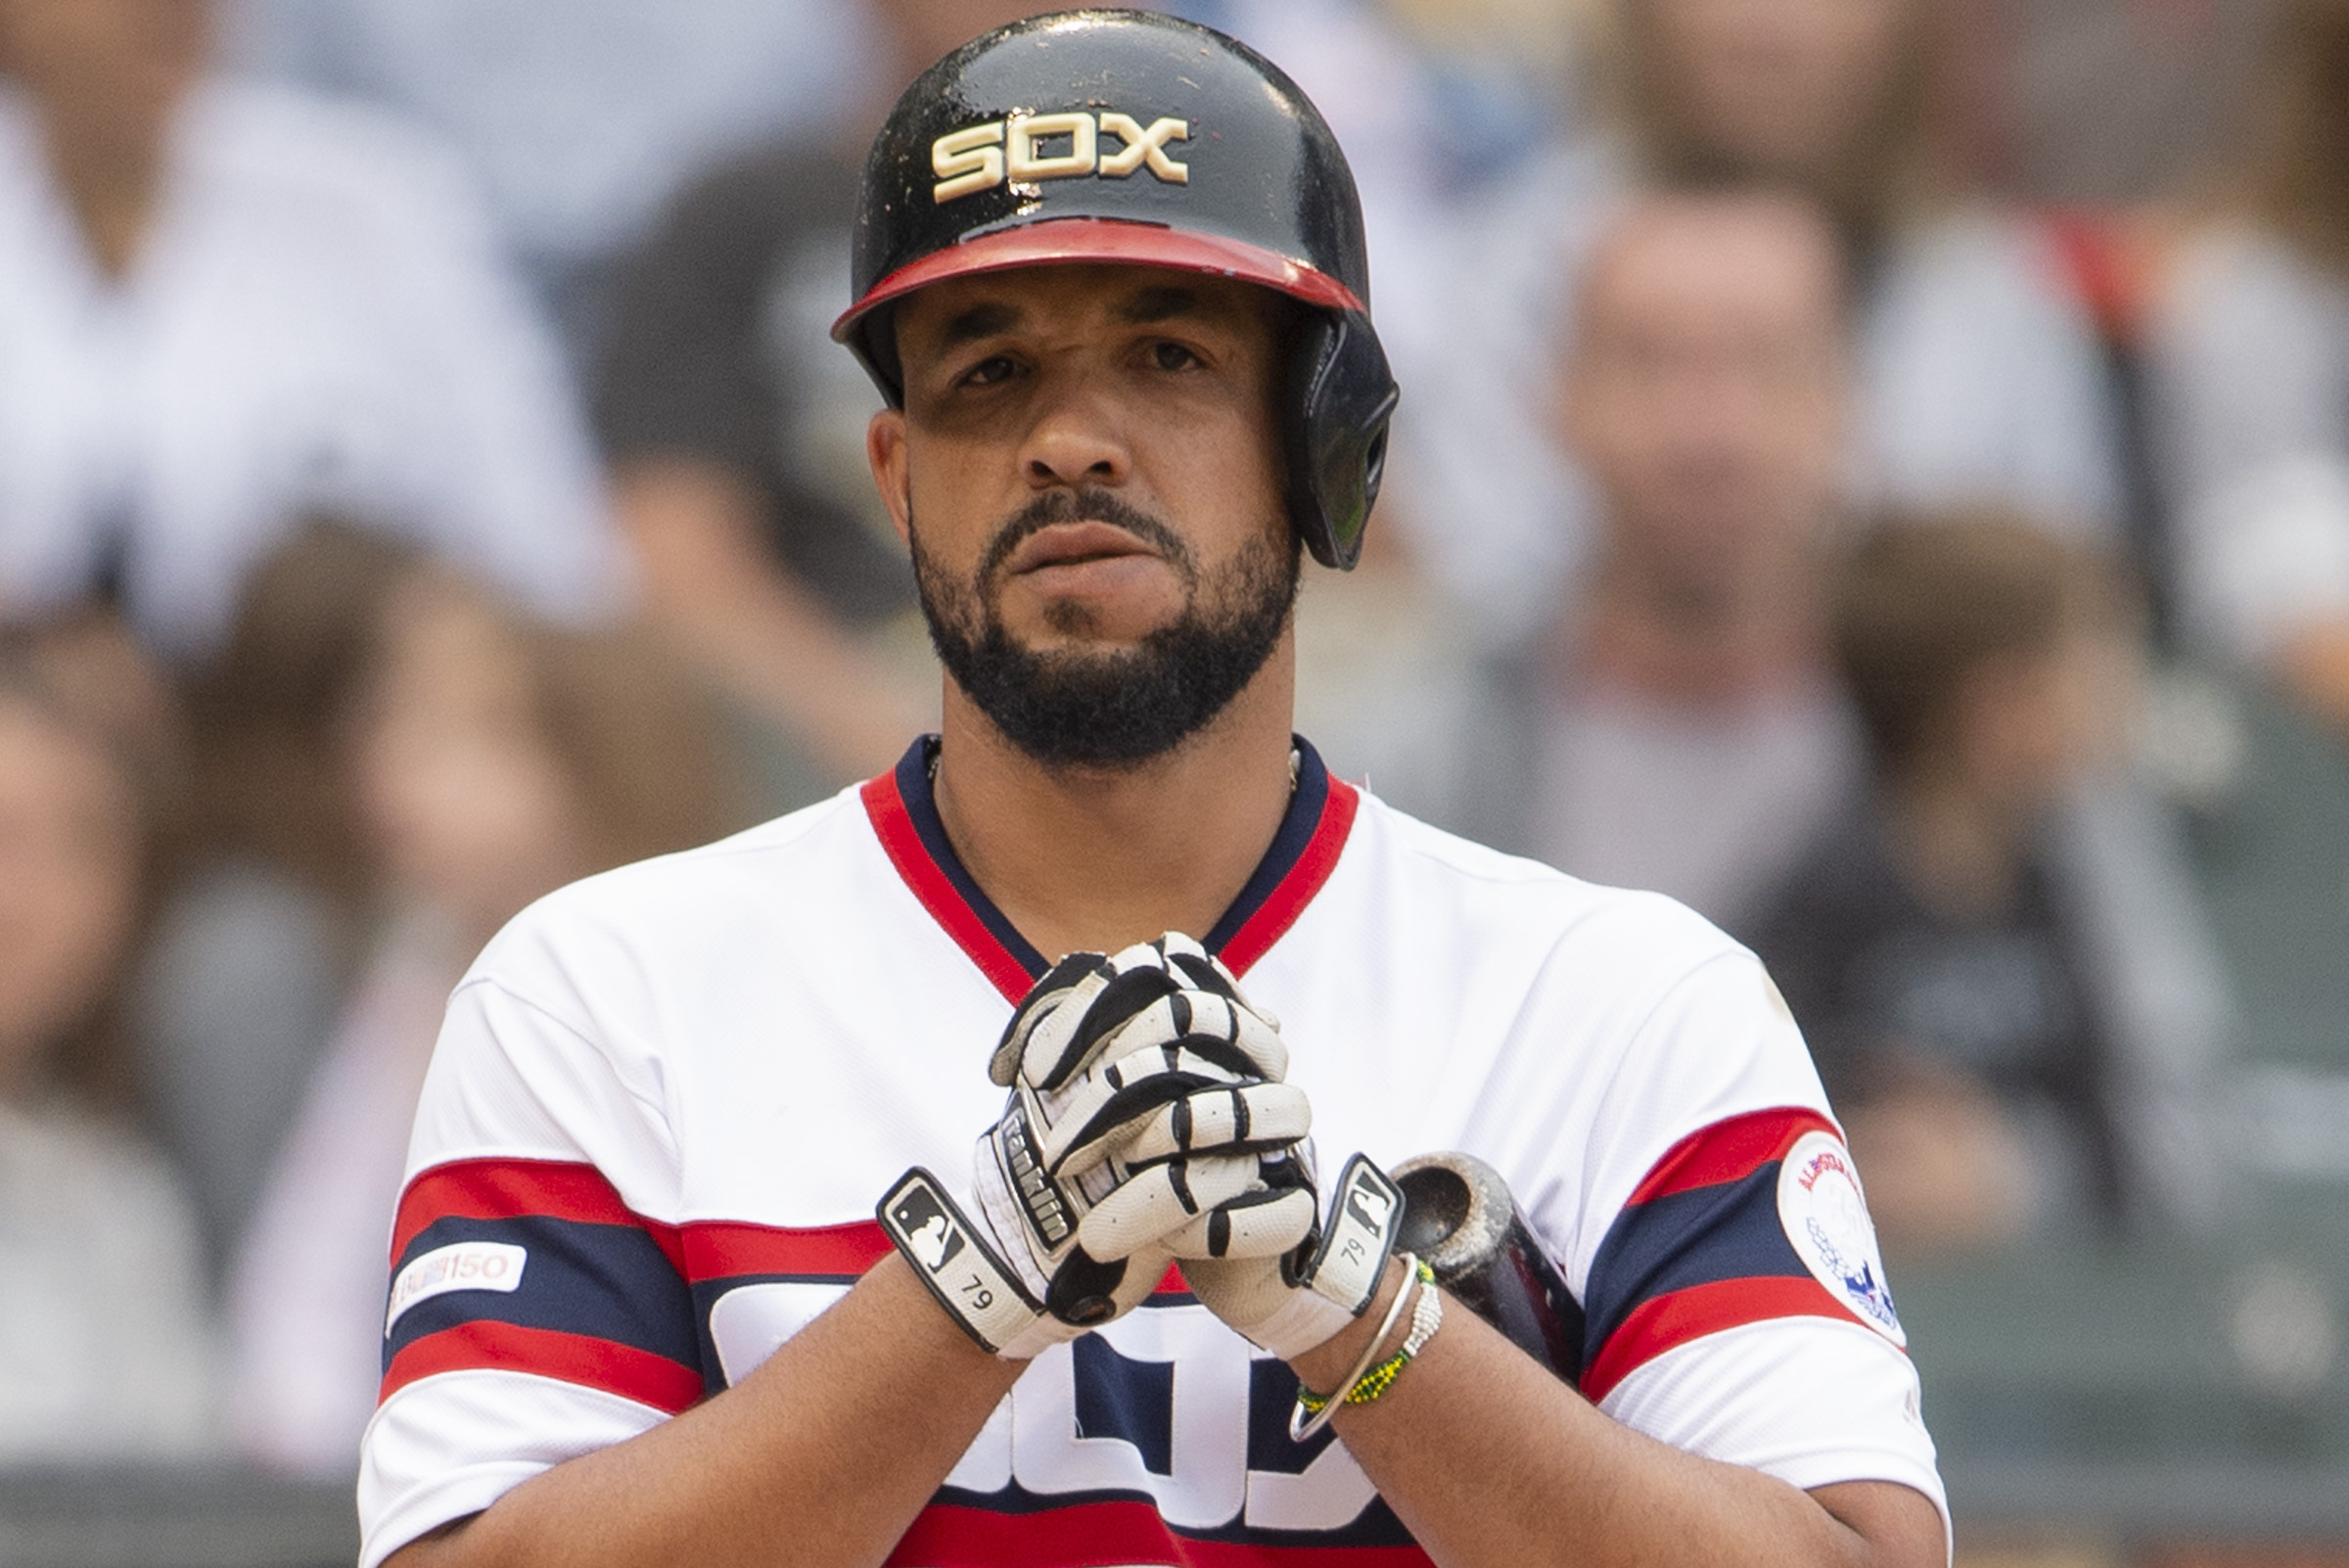 Jose Abreu felt disrespected by White Sox at the end